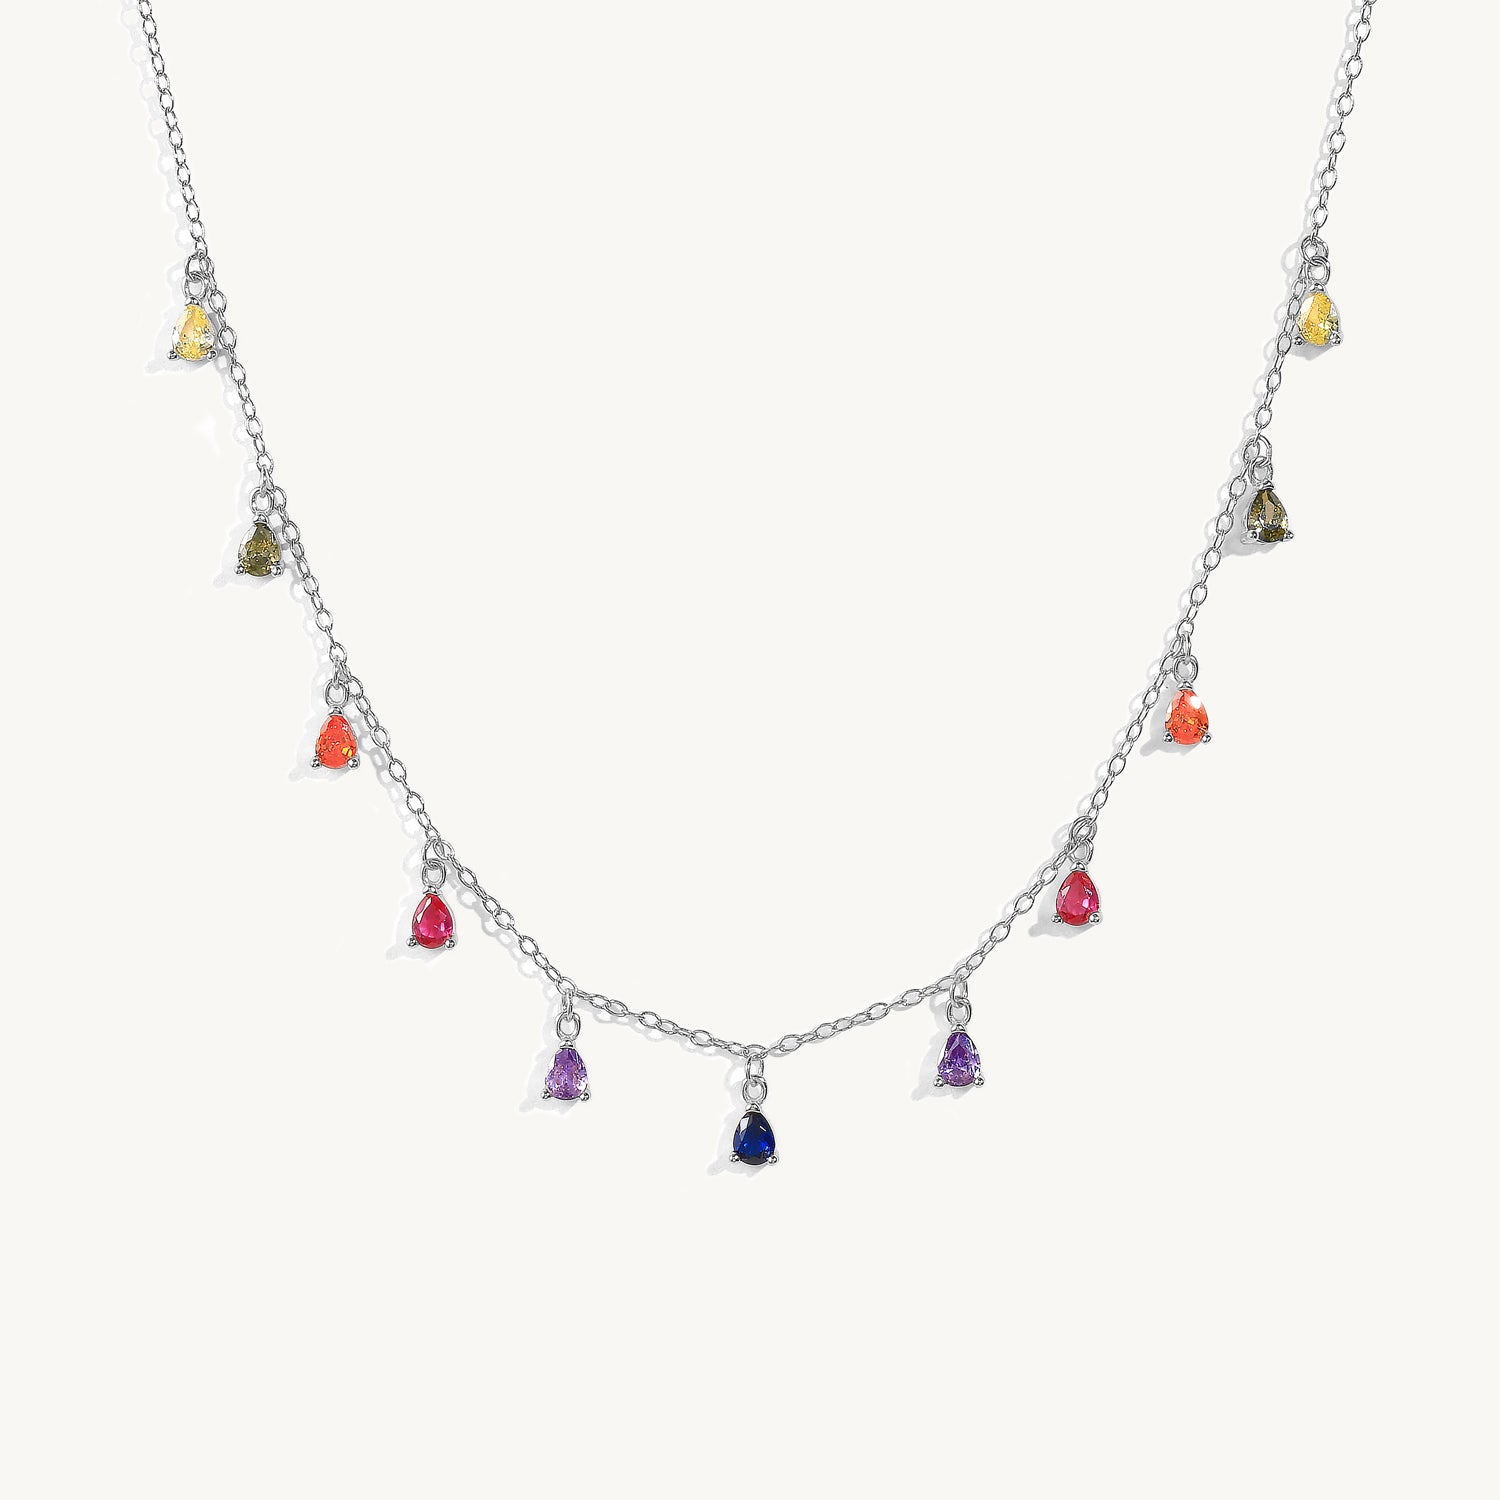 925 sterling silver chain necklace with multicolored zirconia stones.